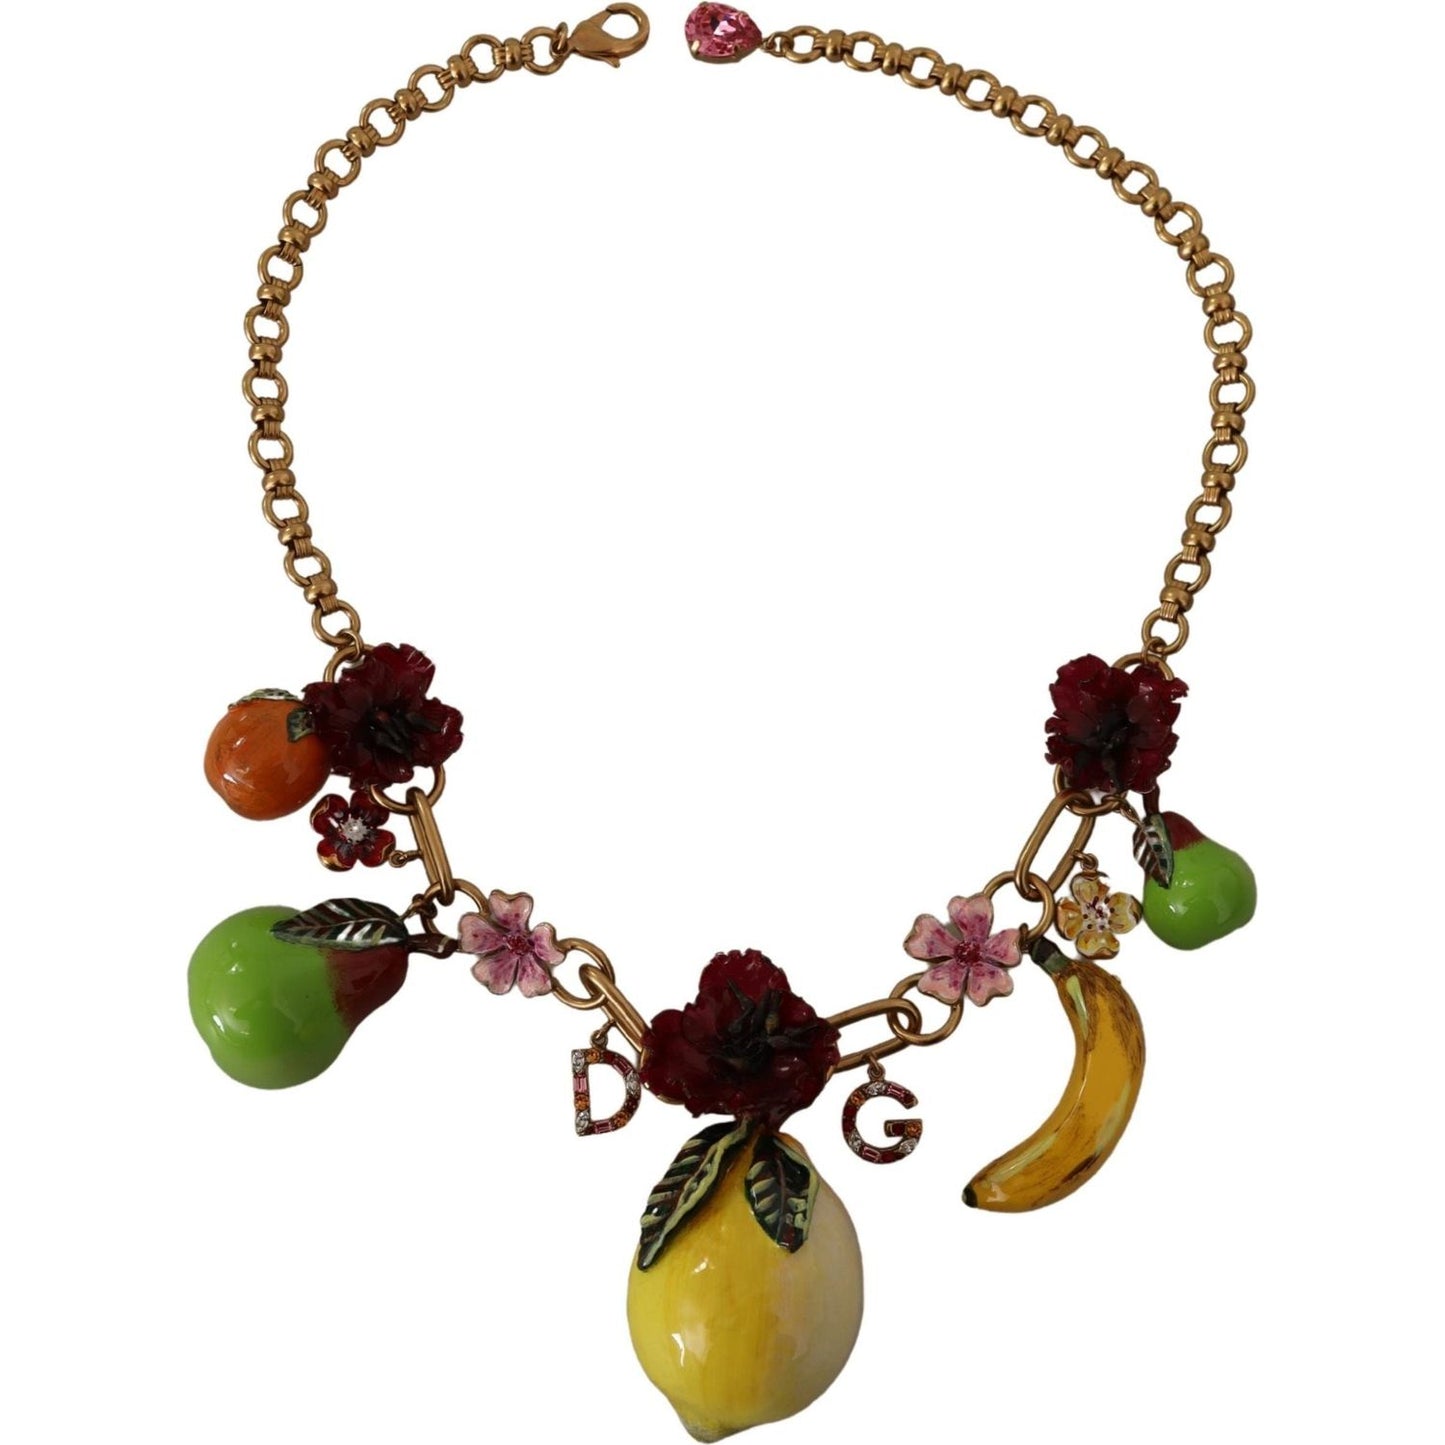 Dolce & Gabbana Chic Gold Statement Sicily Fruit Necklace WOMAN NECKLACE gold-brass-sicily-fruits-roses-statement-necklace IMG_1912-scaled-502e67b7-d07.jpg